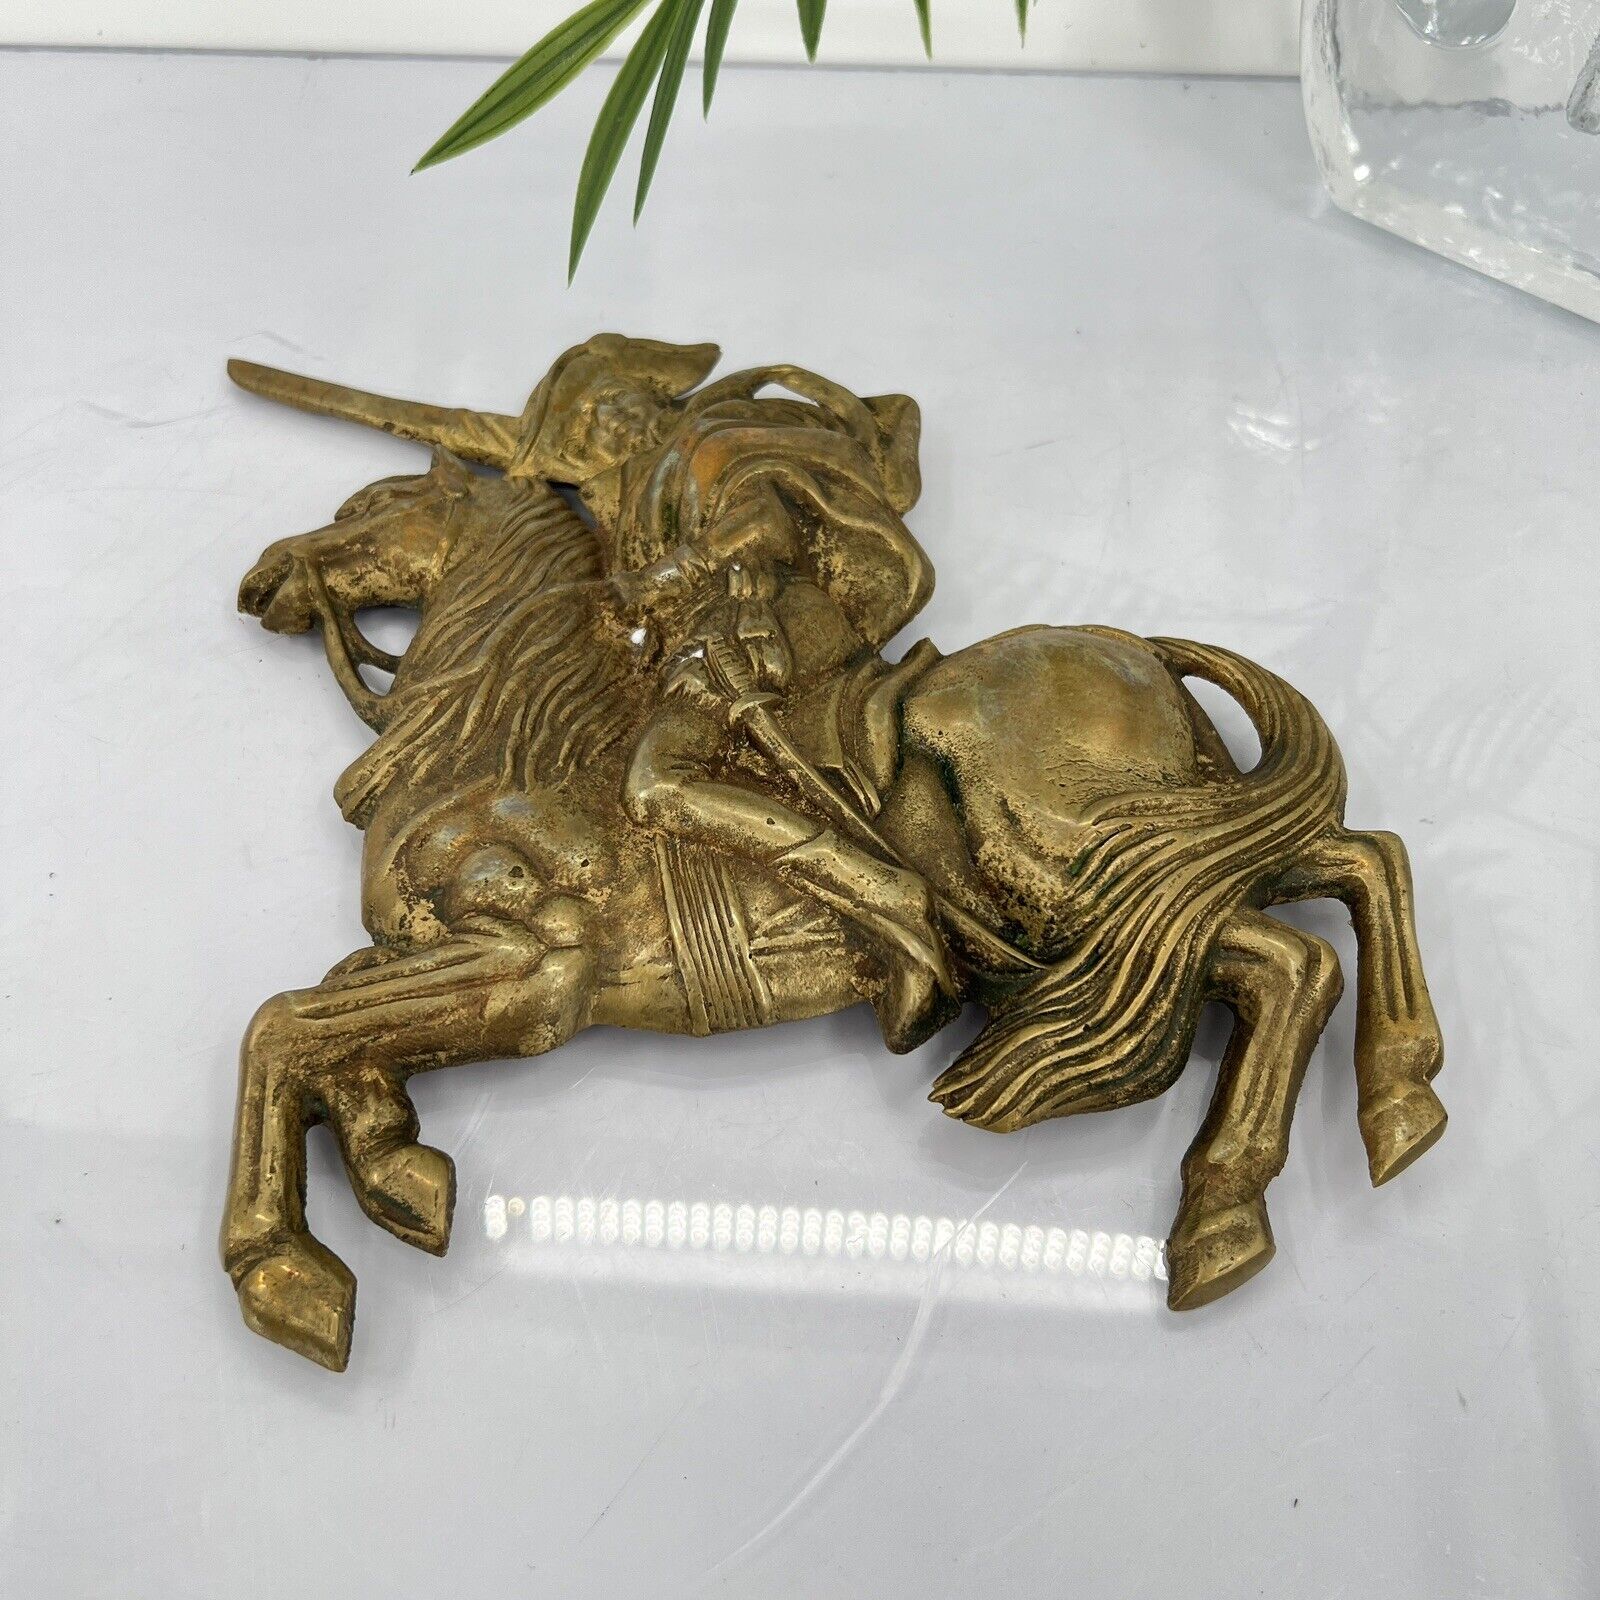 Vintage Solid Brass Napoleon Soldier On Horse Wall Hanging Home Decor